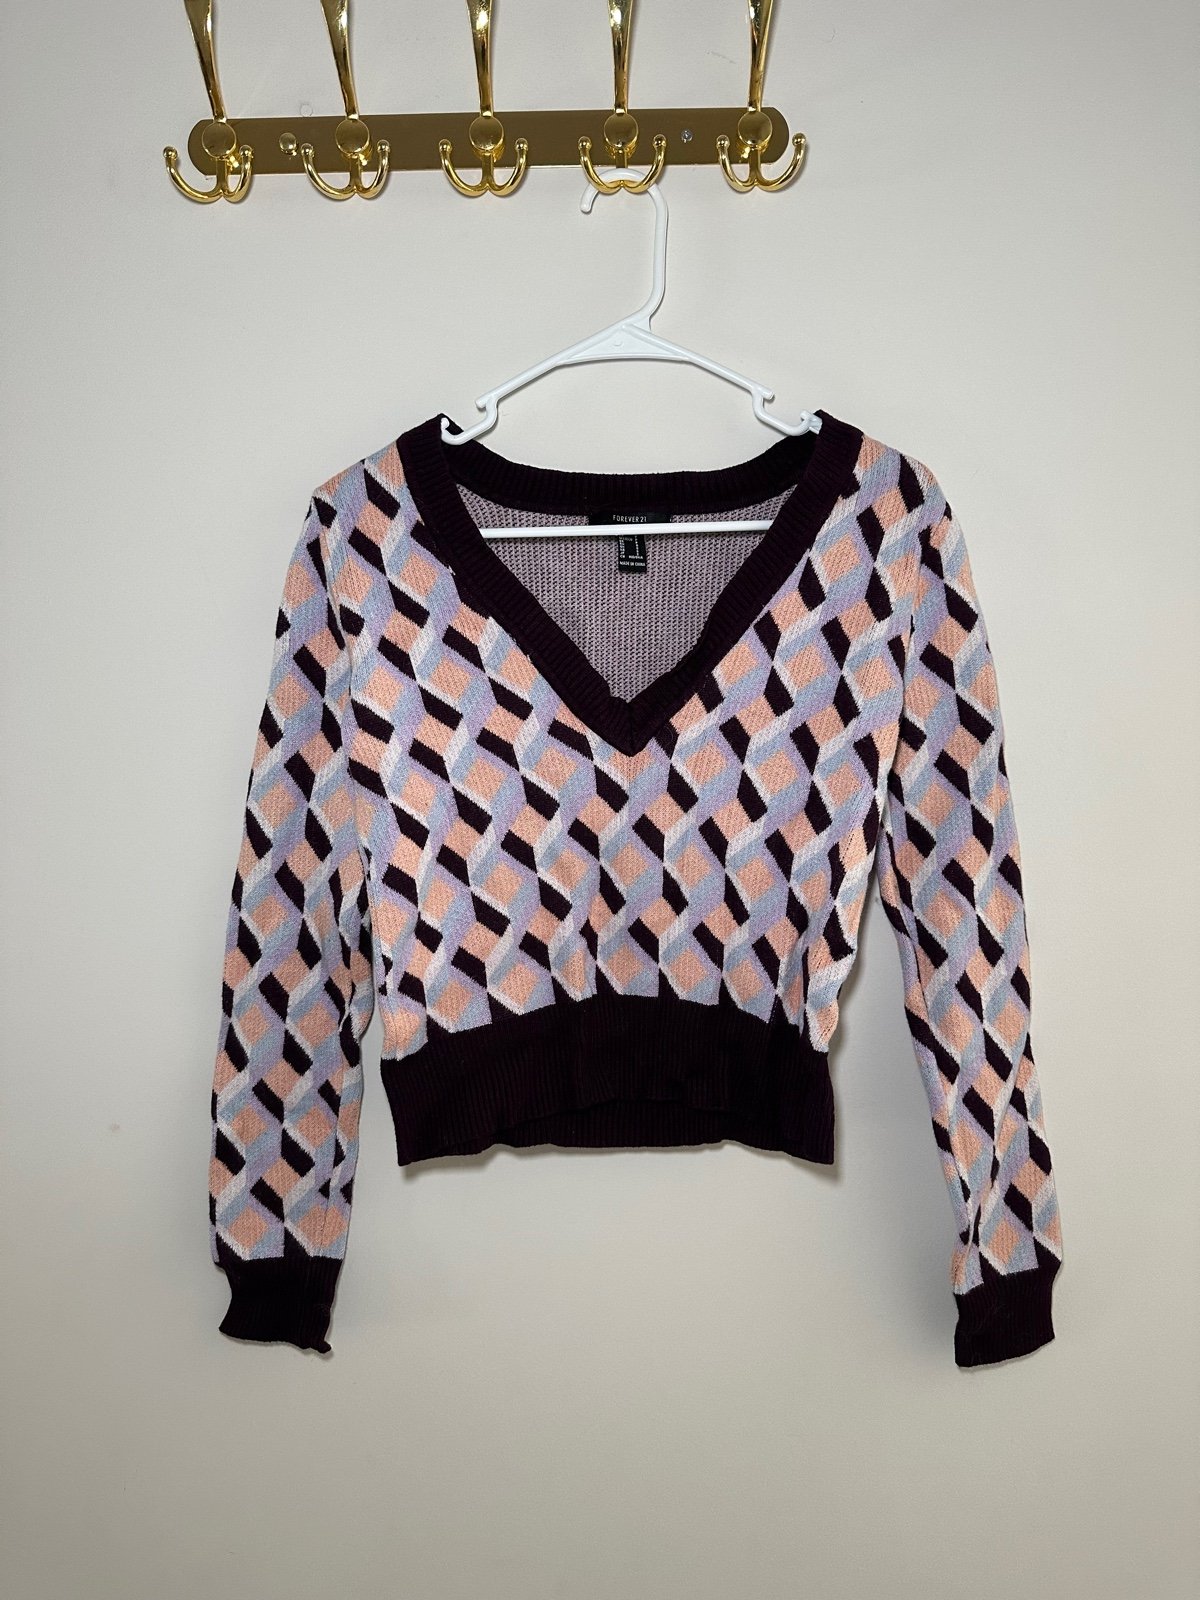 Great FOREVER 21 Sweater GifhBotkW New Style